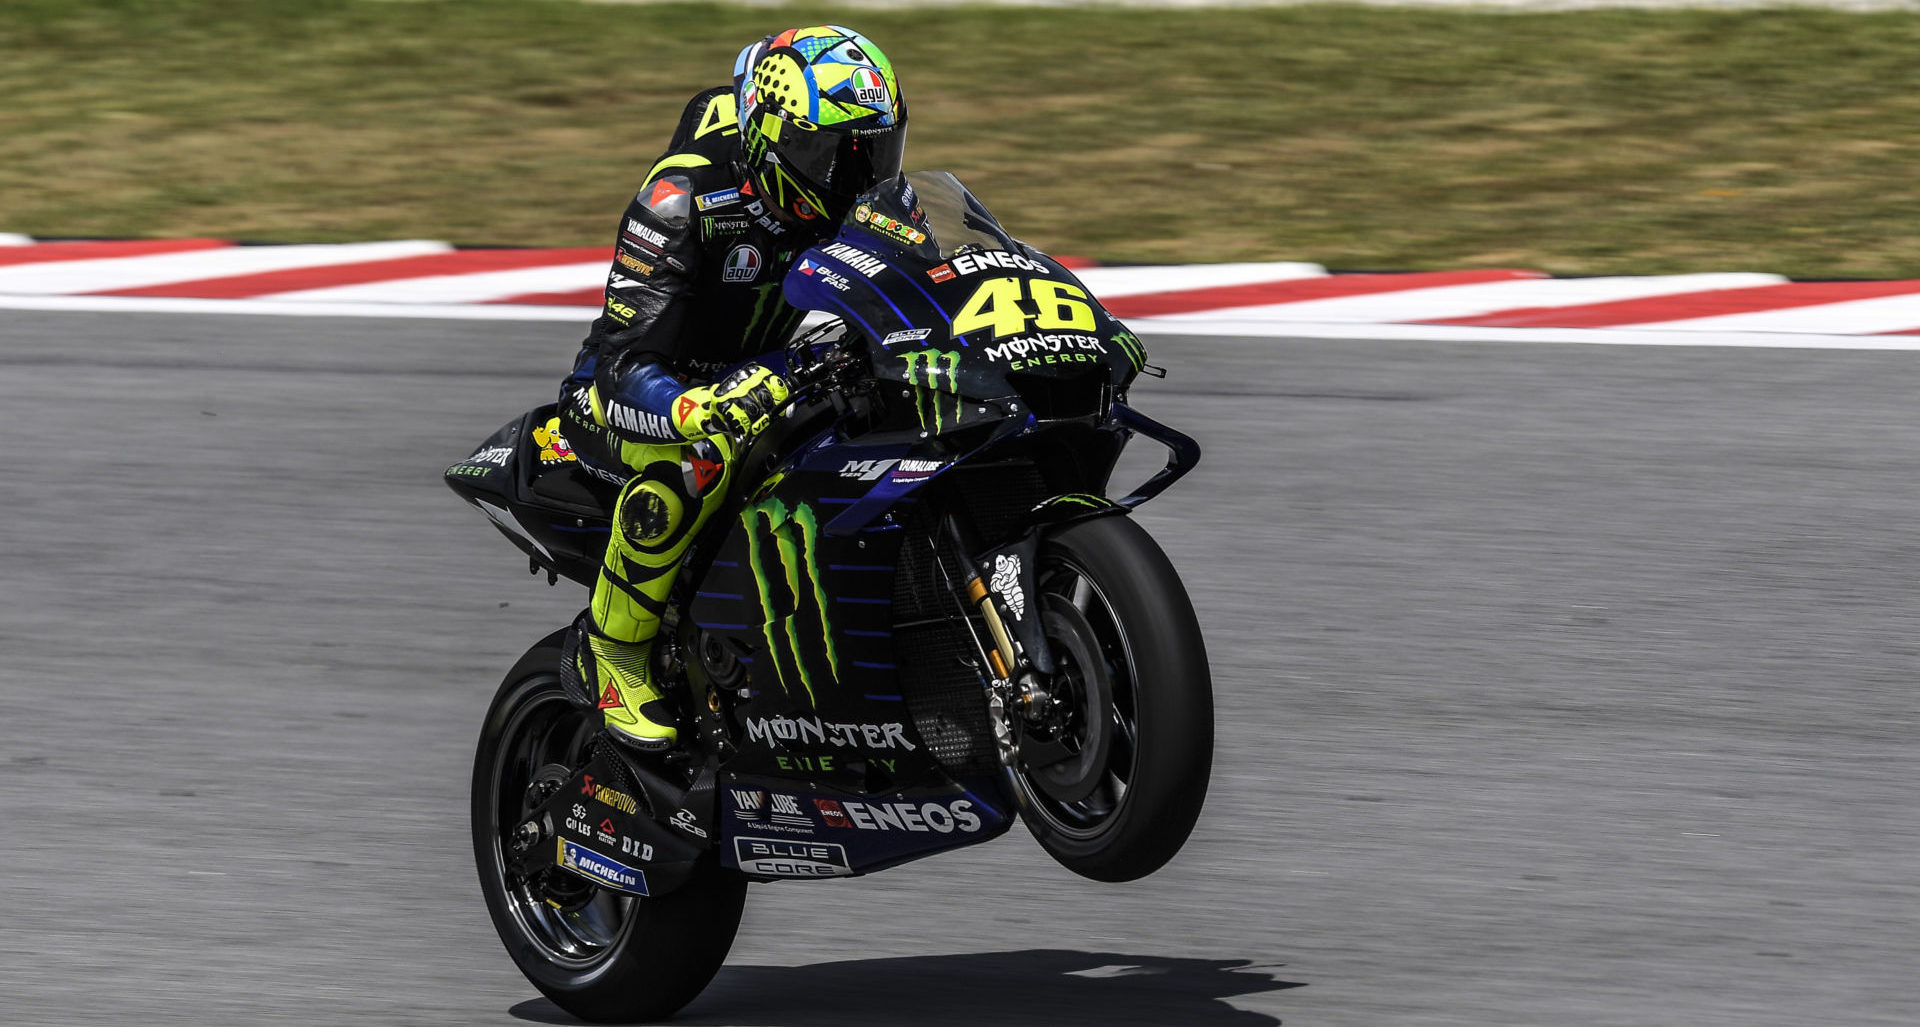 Valentino Rossi (46), as seen during the pre-season MotoGP test at Sepang. Photo courtesy Monster Energy Yamaha.